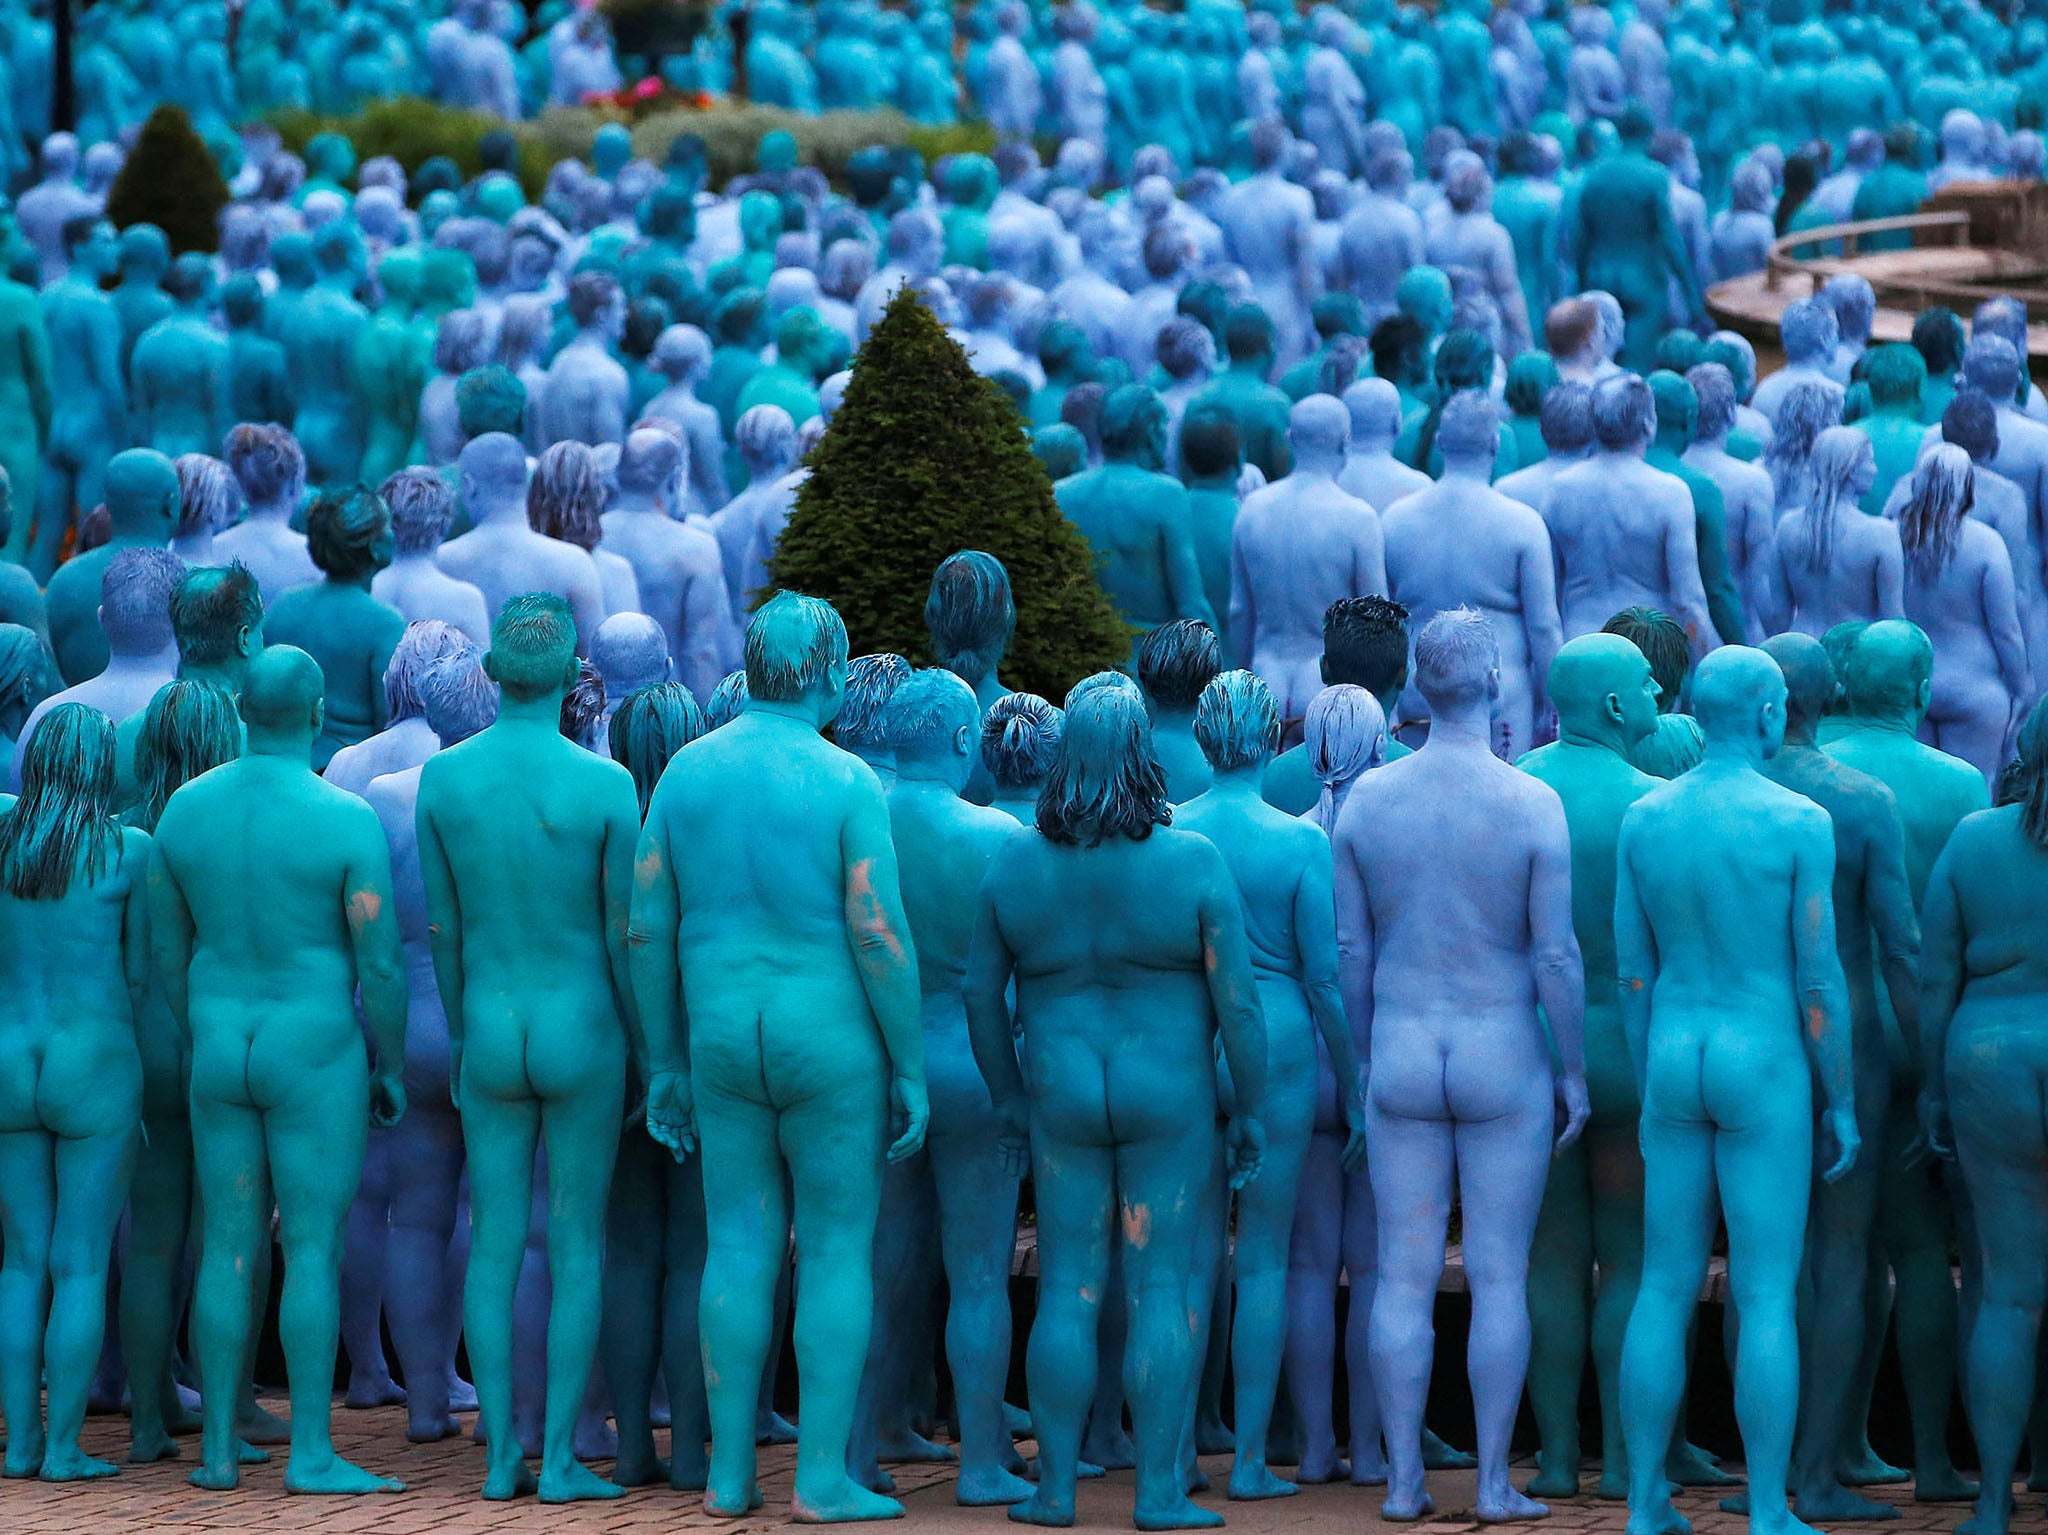 People from across the globe participated in Spencer Tunick's 'Sea of Hull' artwork